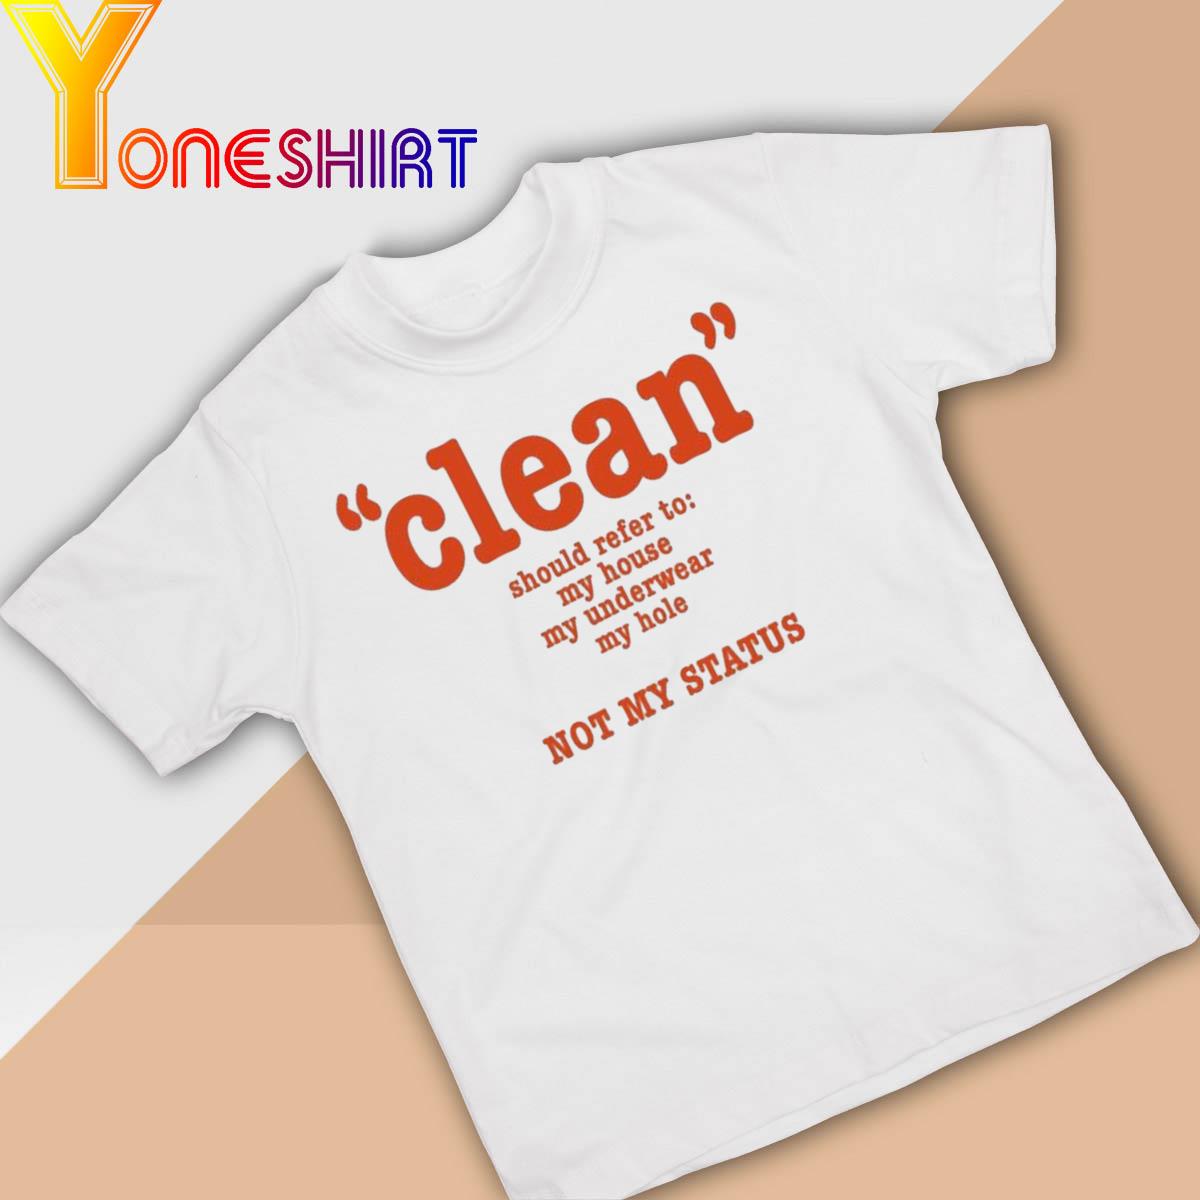 Clean Should Refer To My House My Underwear My Hole Not My Status shirt